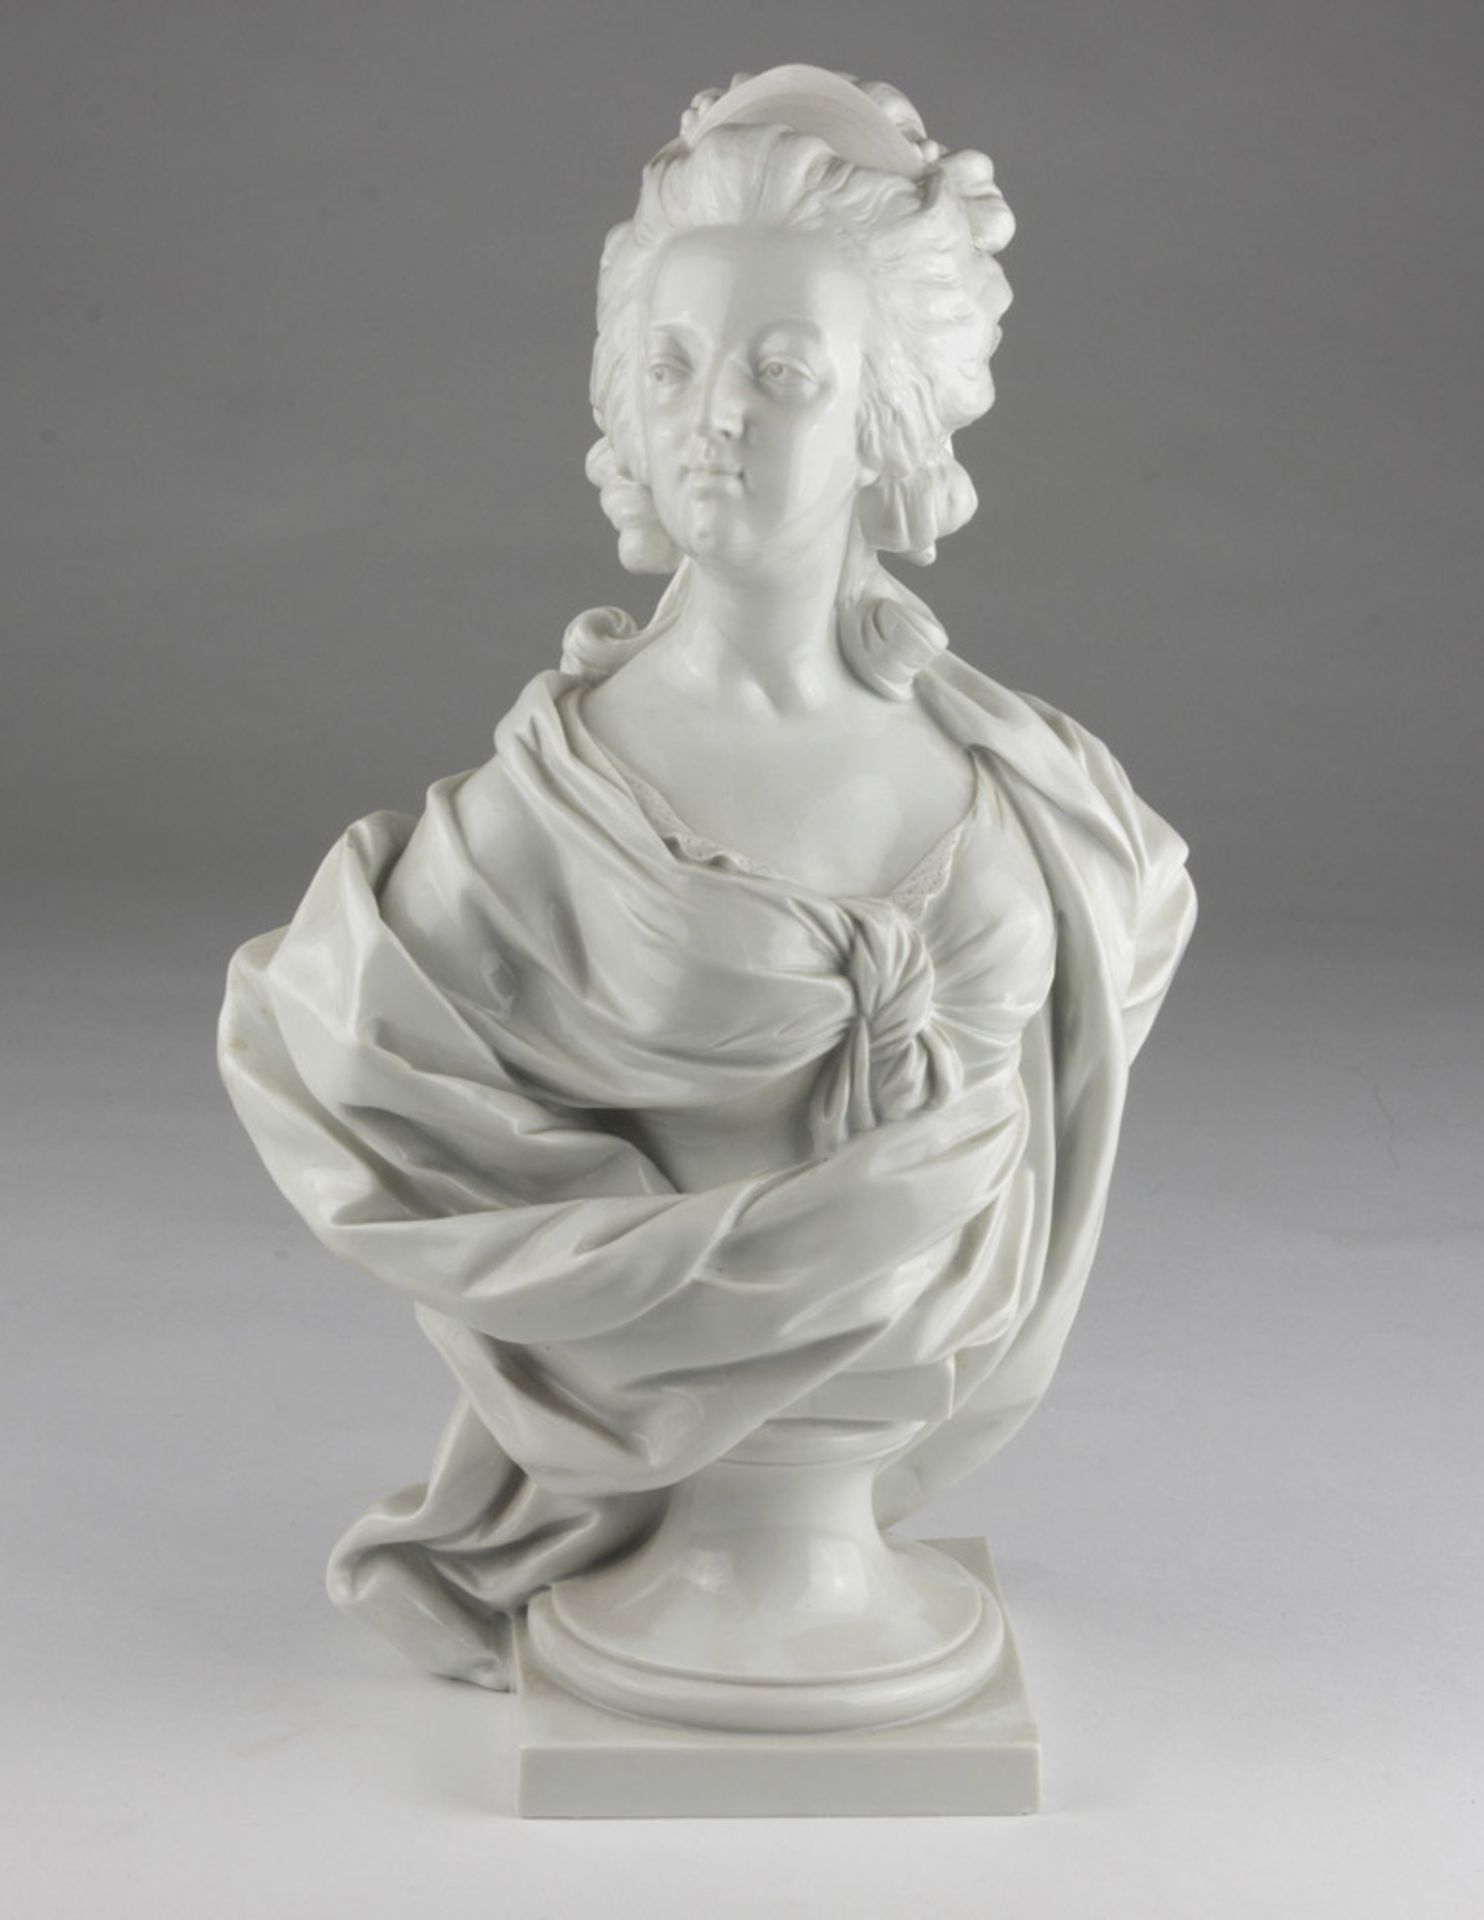 MARIE ANTONIETTE'S BUST IN PORCELAIN, FRANCE EARLY 20TH CENTURY entirely of white enamel, with